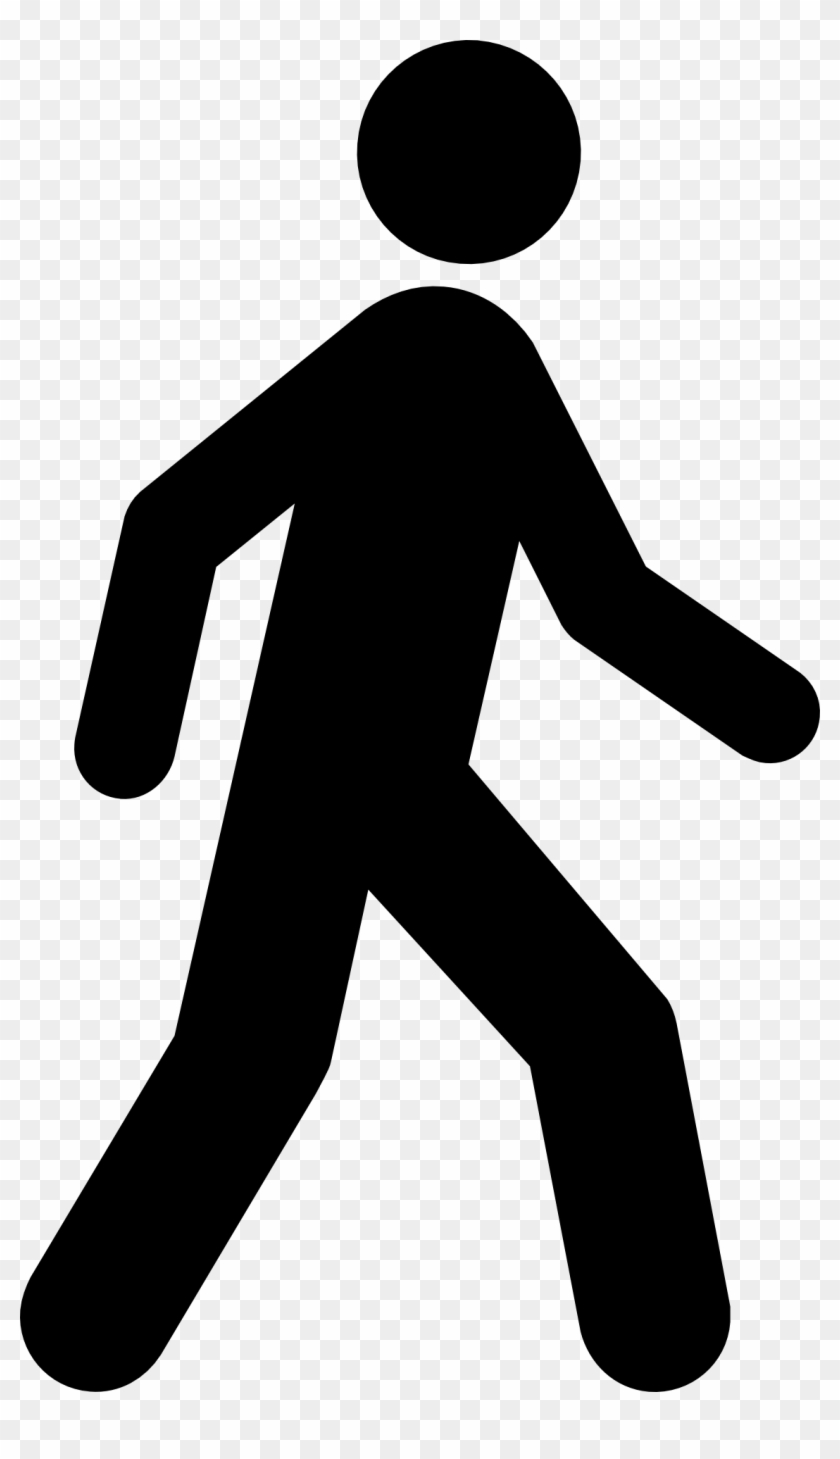 Stick - Walking Man Icon Png Clipart #1753911